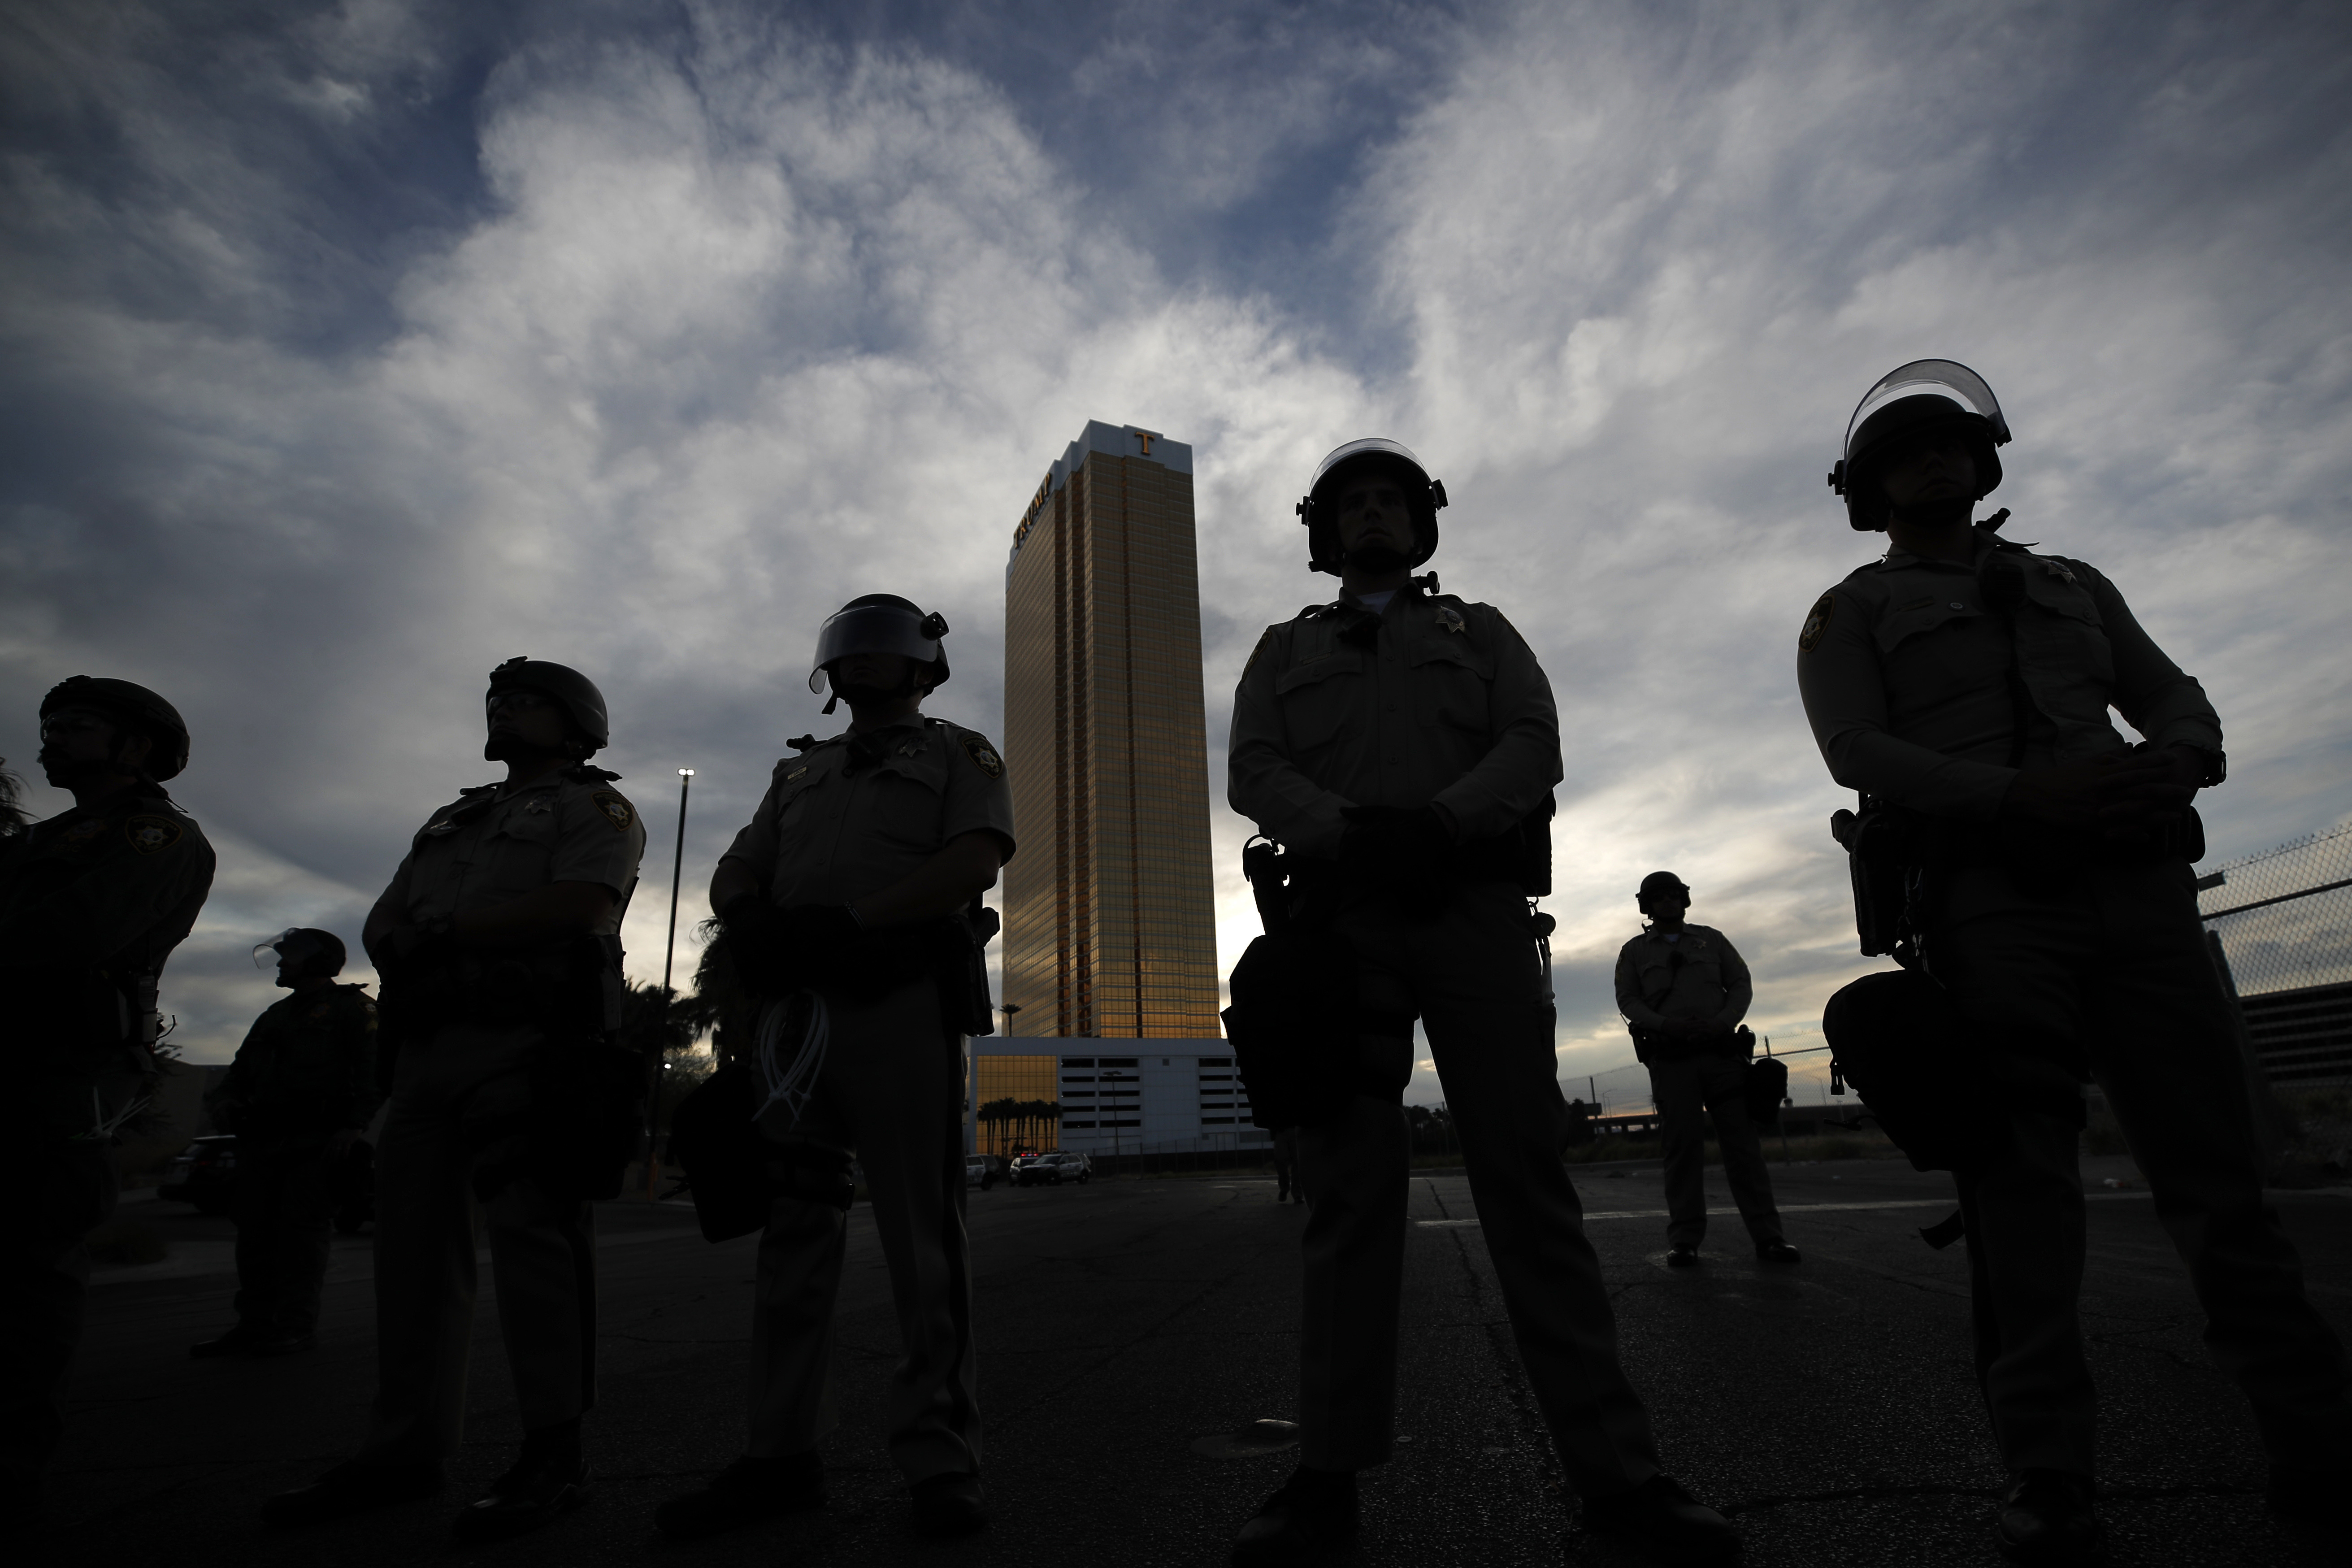 Police stand guard as protesters rally at the Trump Tower, Monday, June 1, 2020, in Las Vegas, over the death of George Floyd. Floyd, a black man, died after being restrained by Minneapolis police officers on Memorial Day. Photo: AP